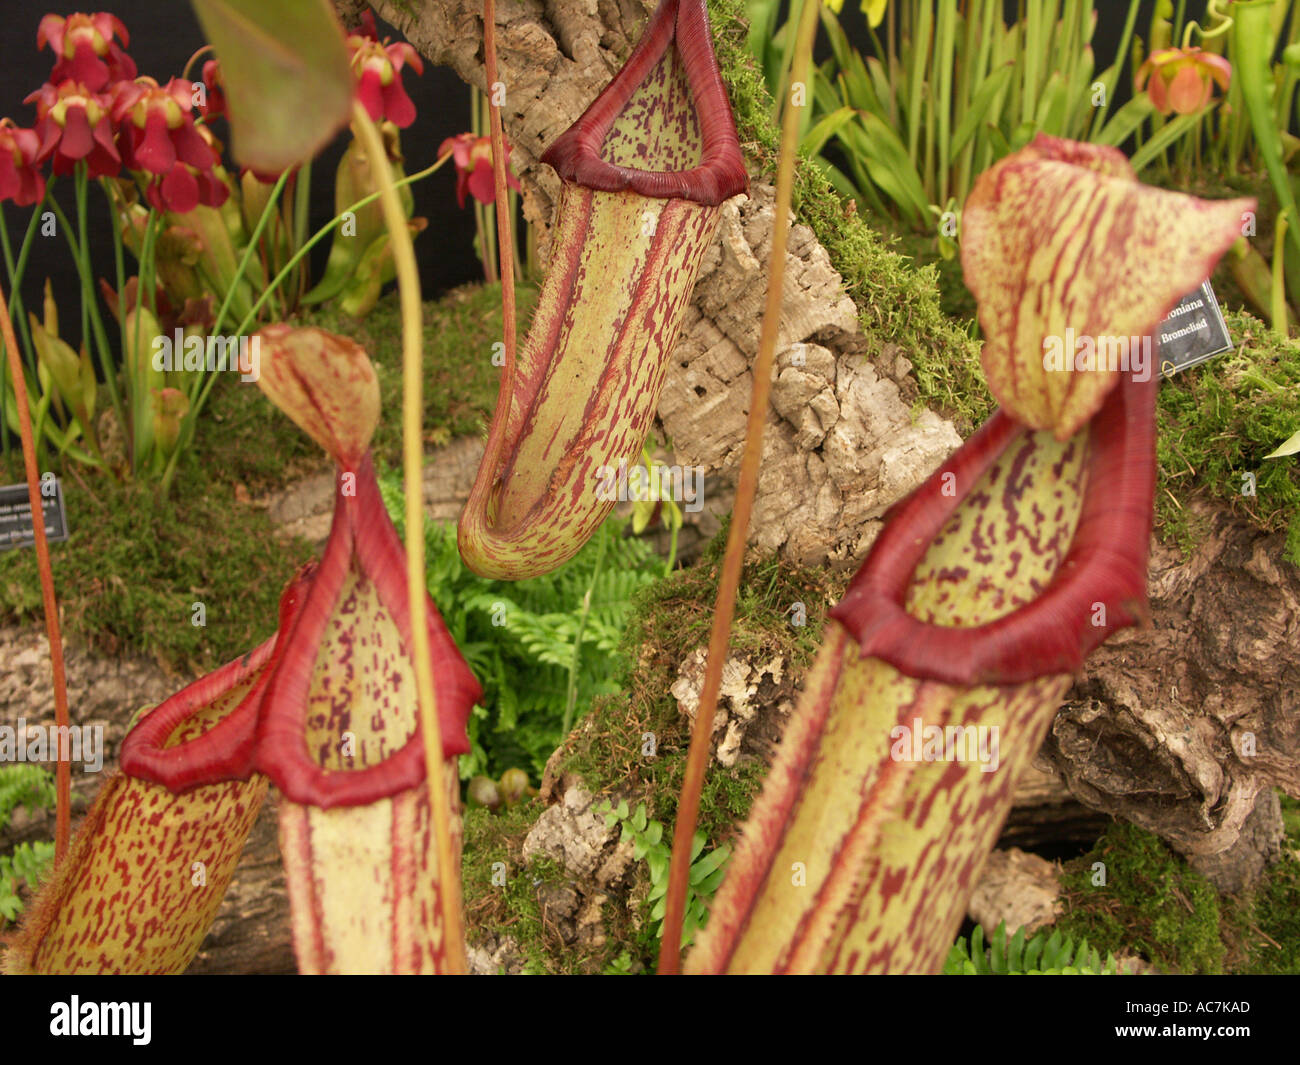 Pitcher Plants Nepenthes maxima on display at the Malvern spring flower show 2004 Worcestershire England Stock Photo